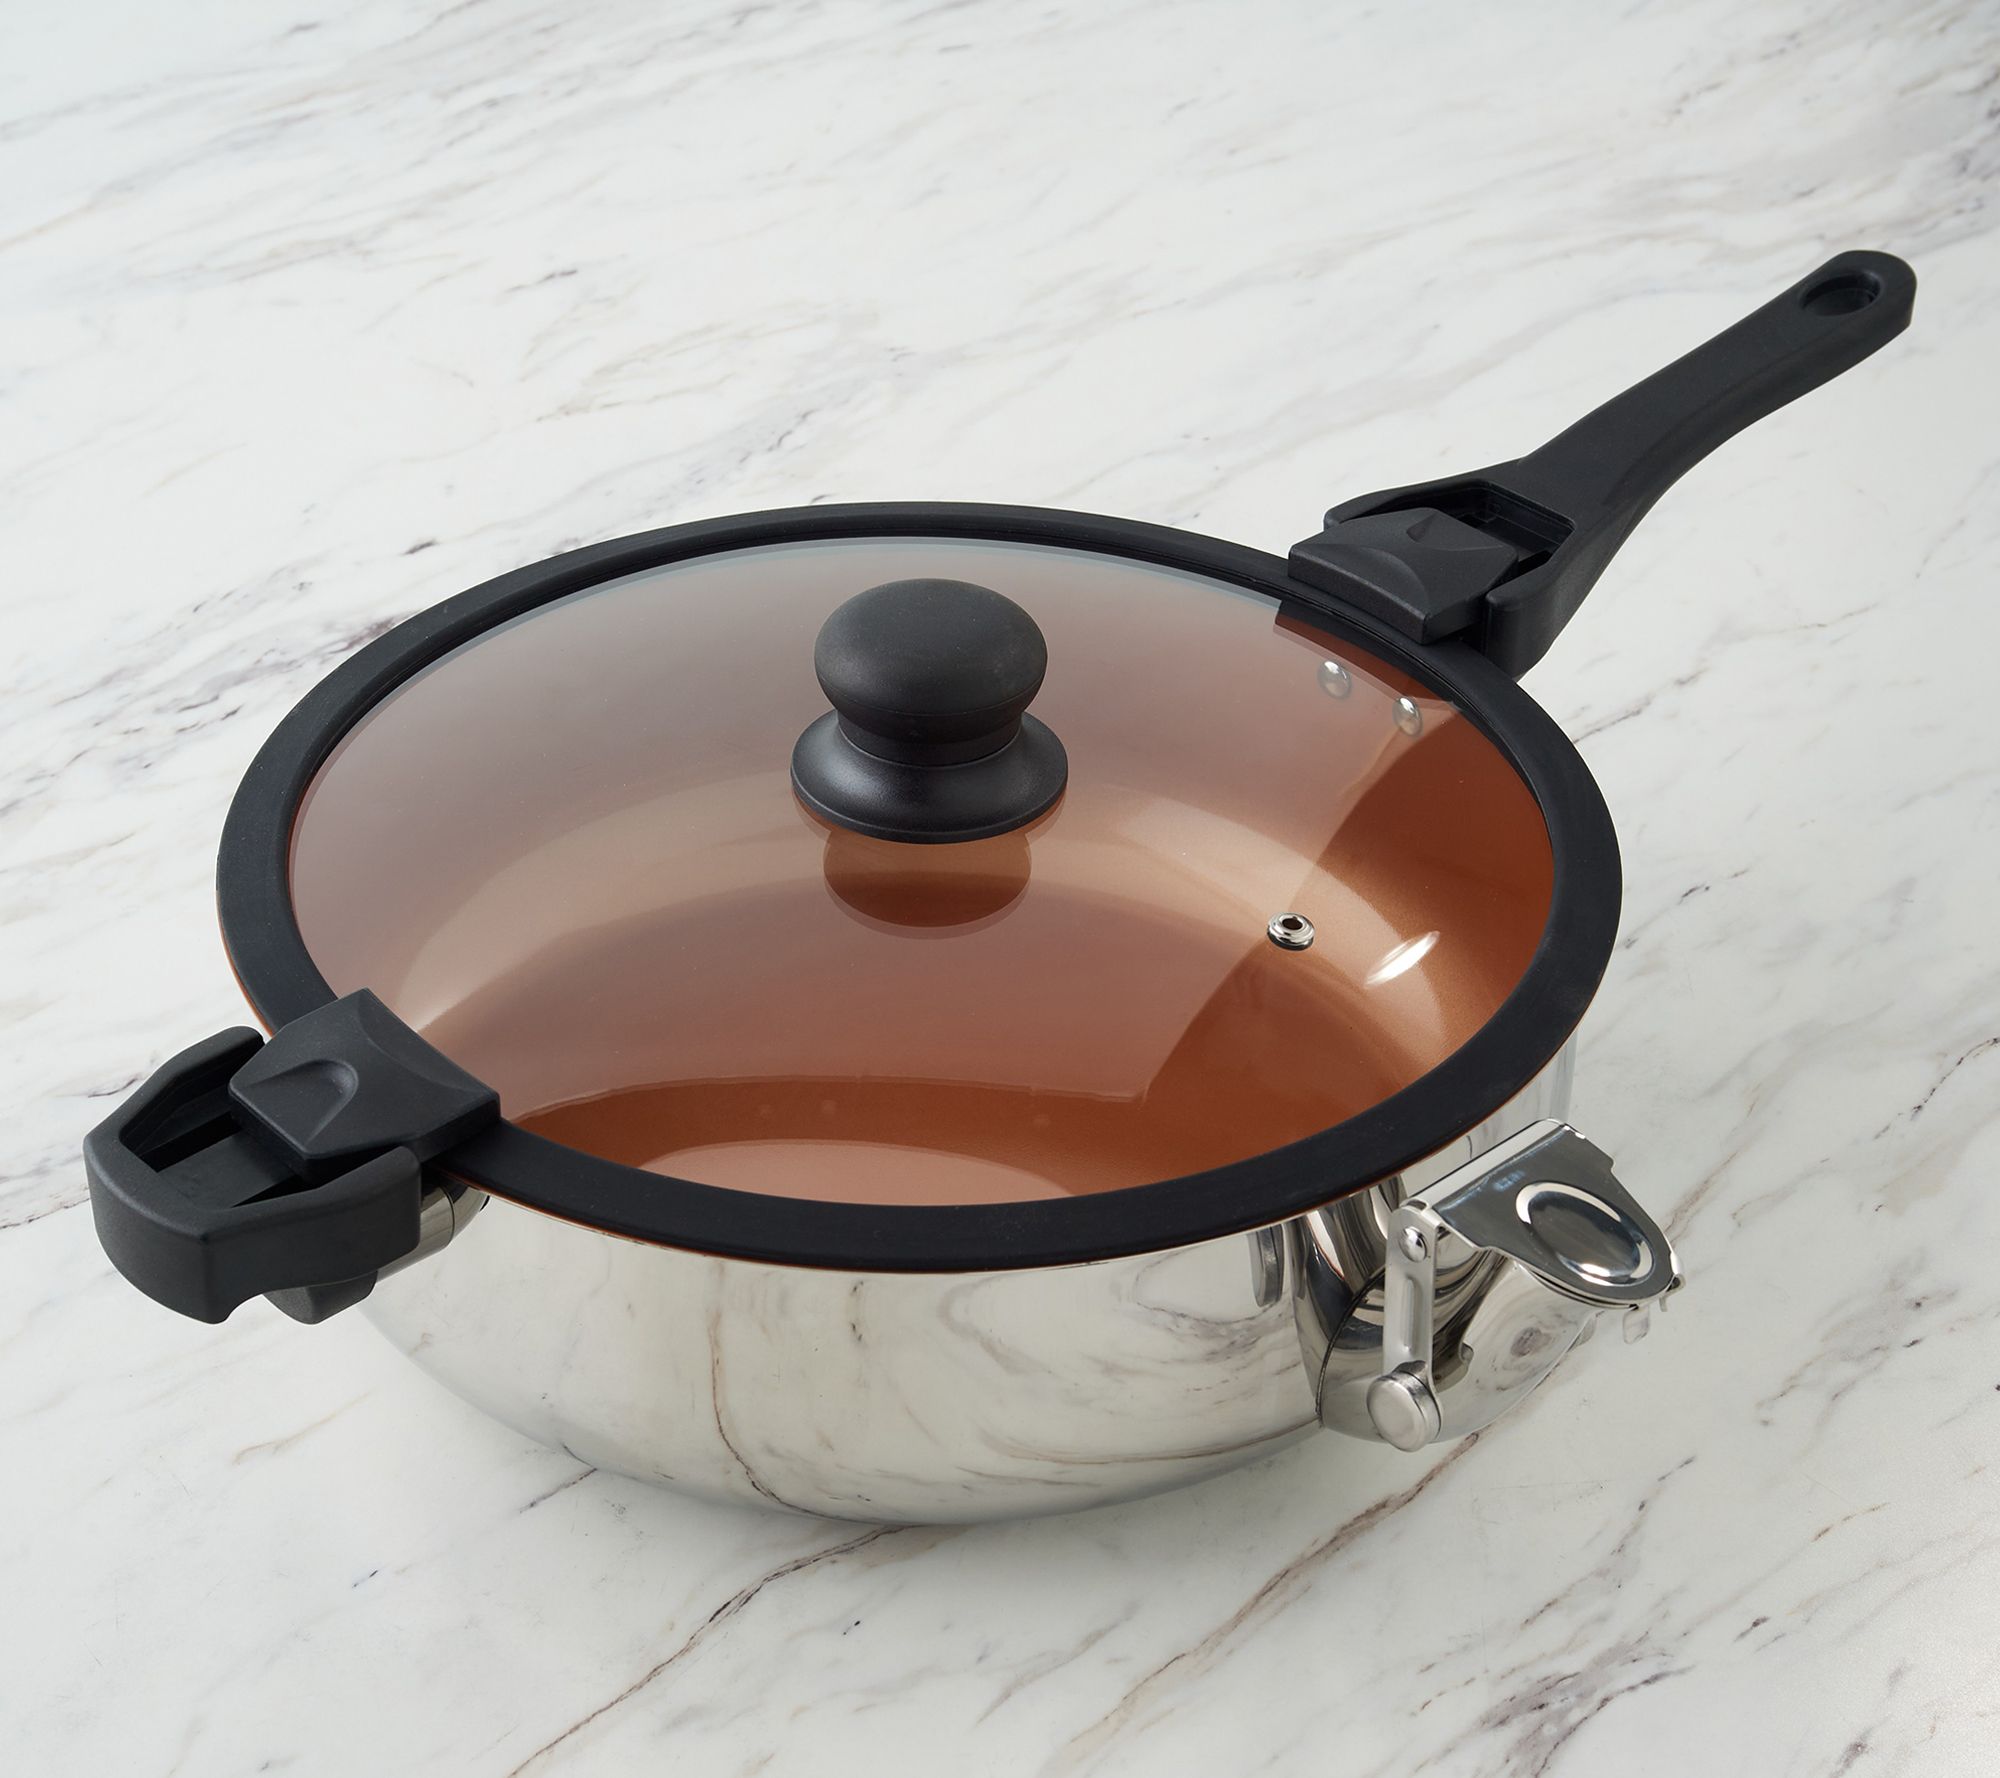 Old Mountain 2-Qt. Sauce Pan with Lid, Black